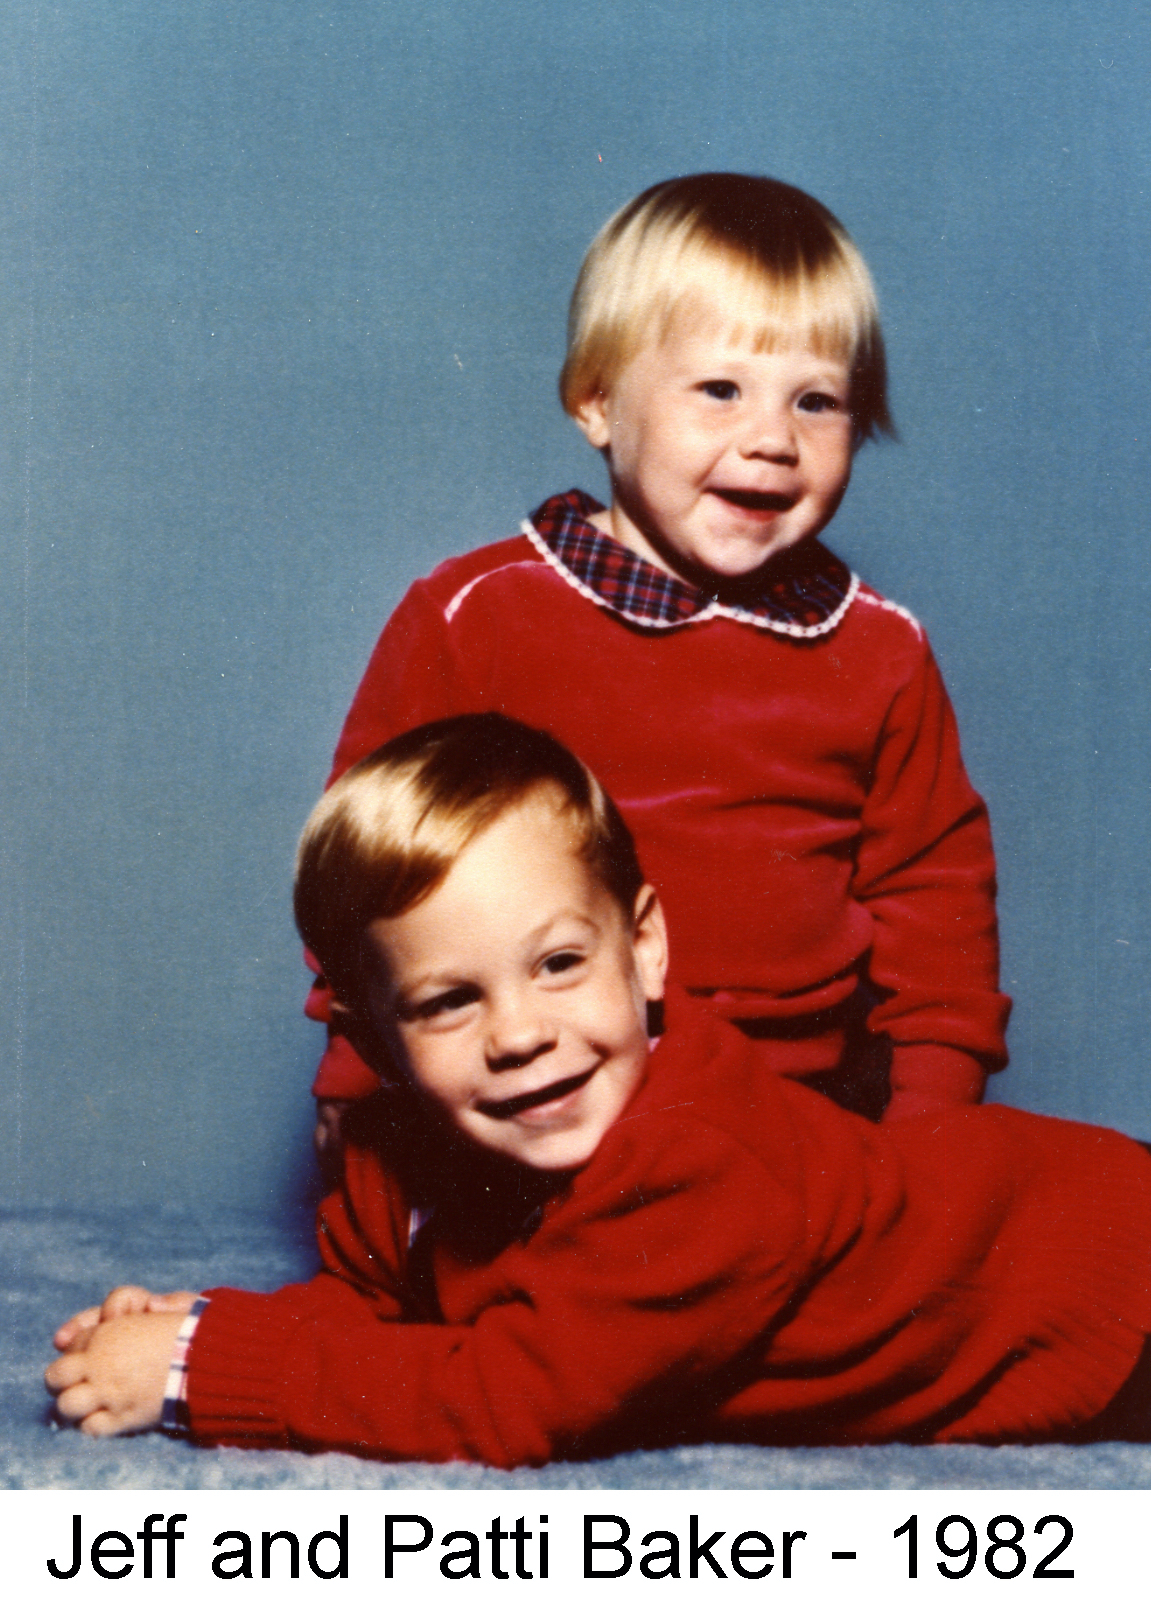 Jeff and Patty Baker in red sweaters in 1982